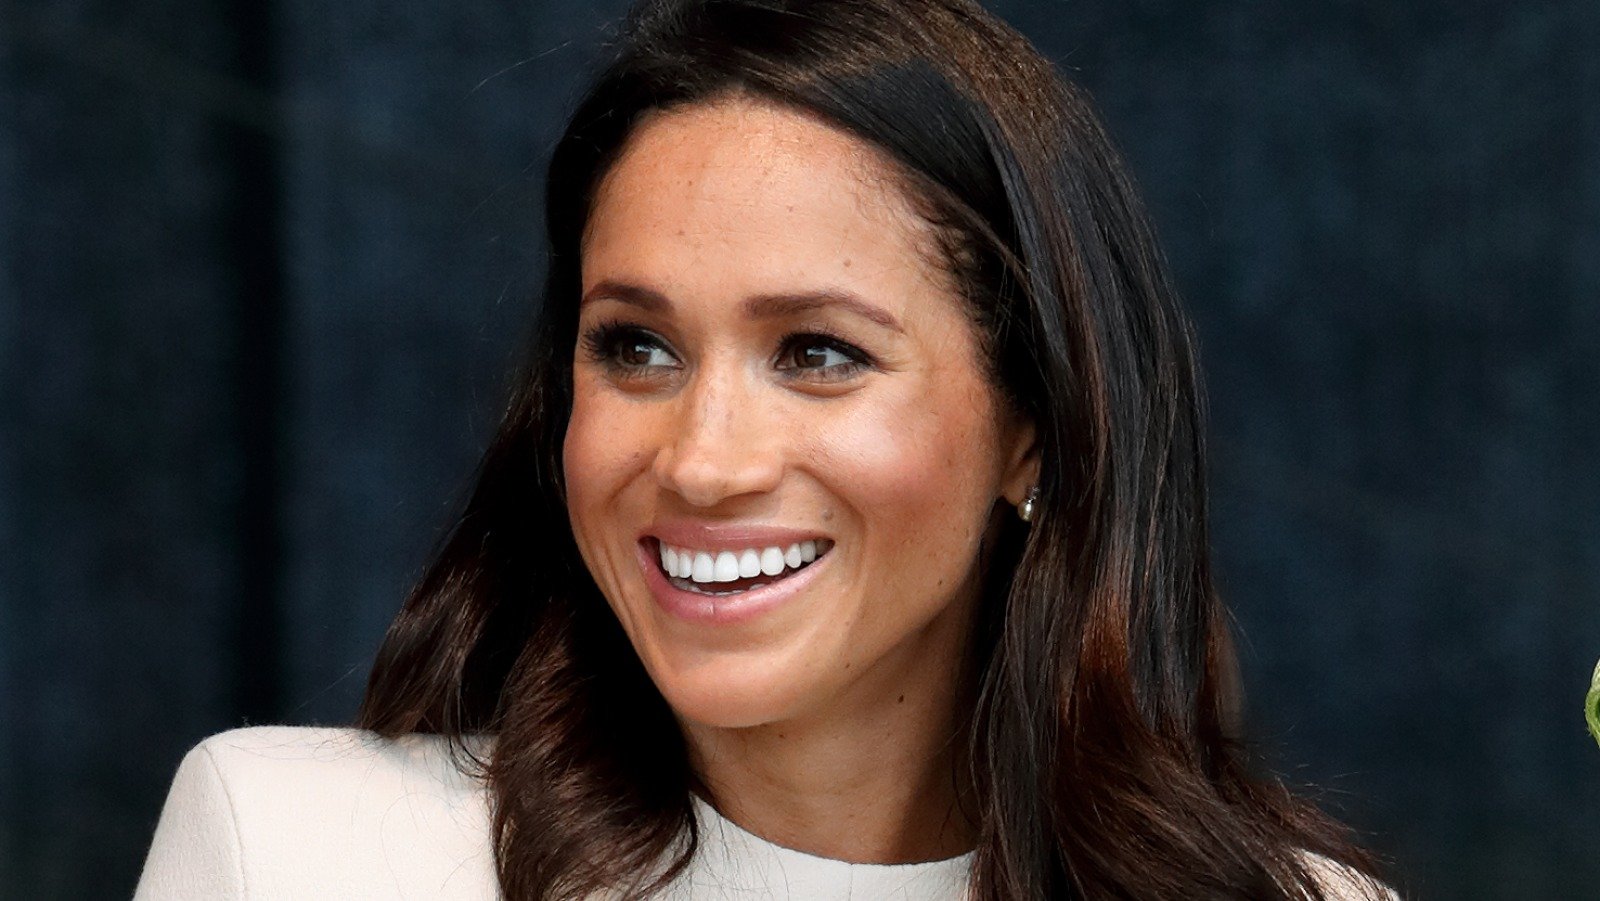 The Most Expensive Outfits Meghan Markle Has Ever Worn - The List